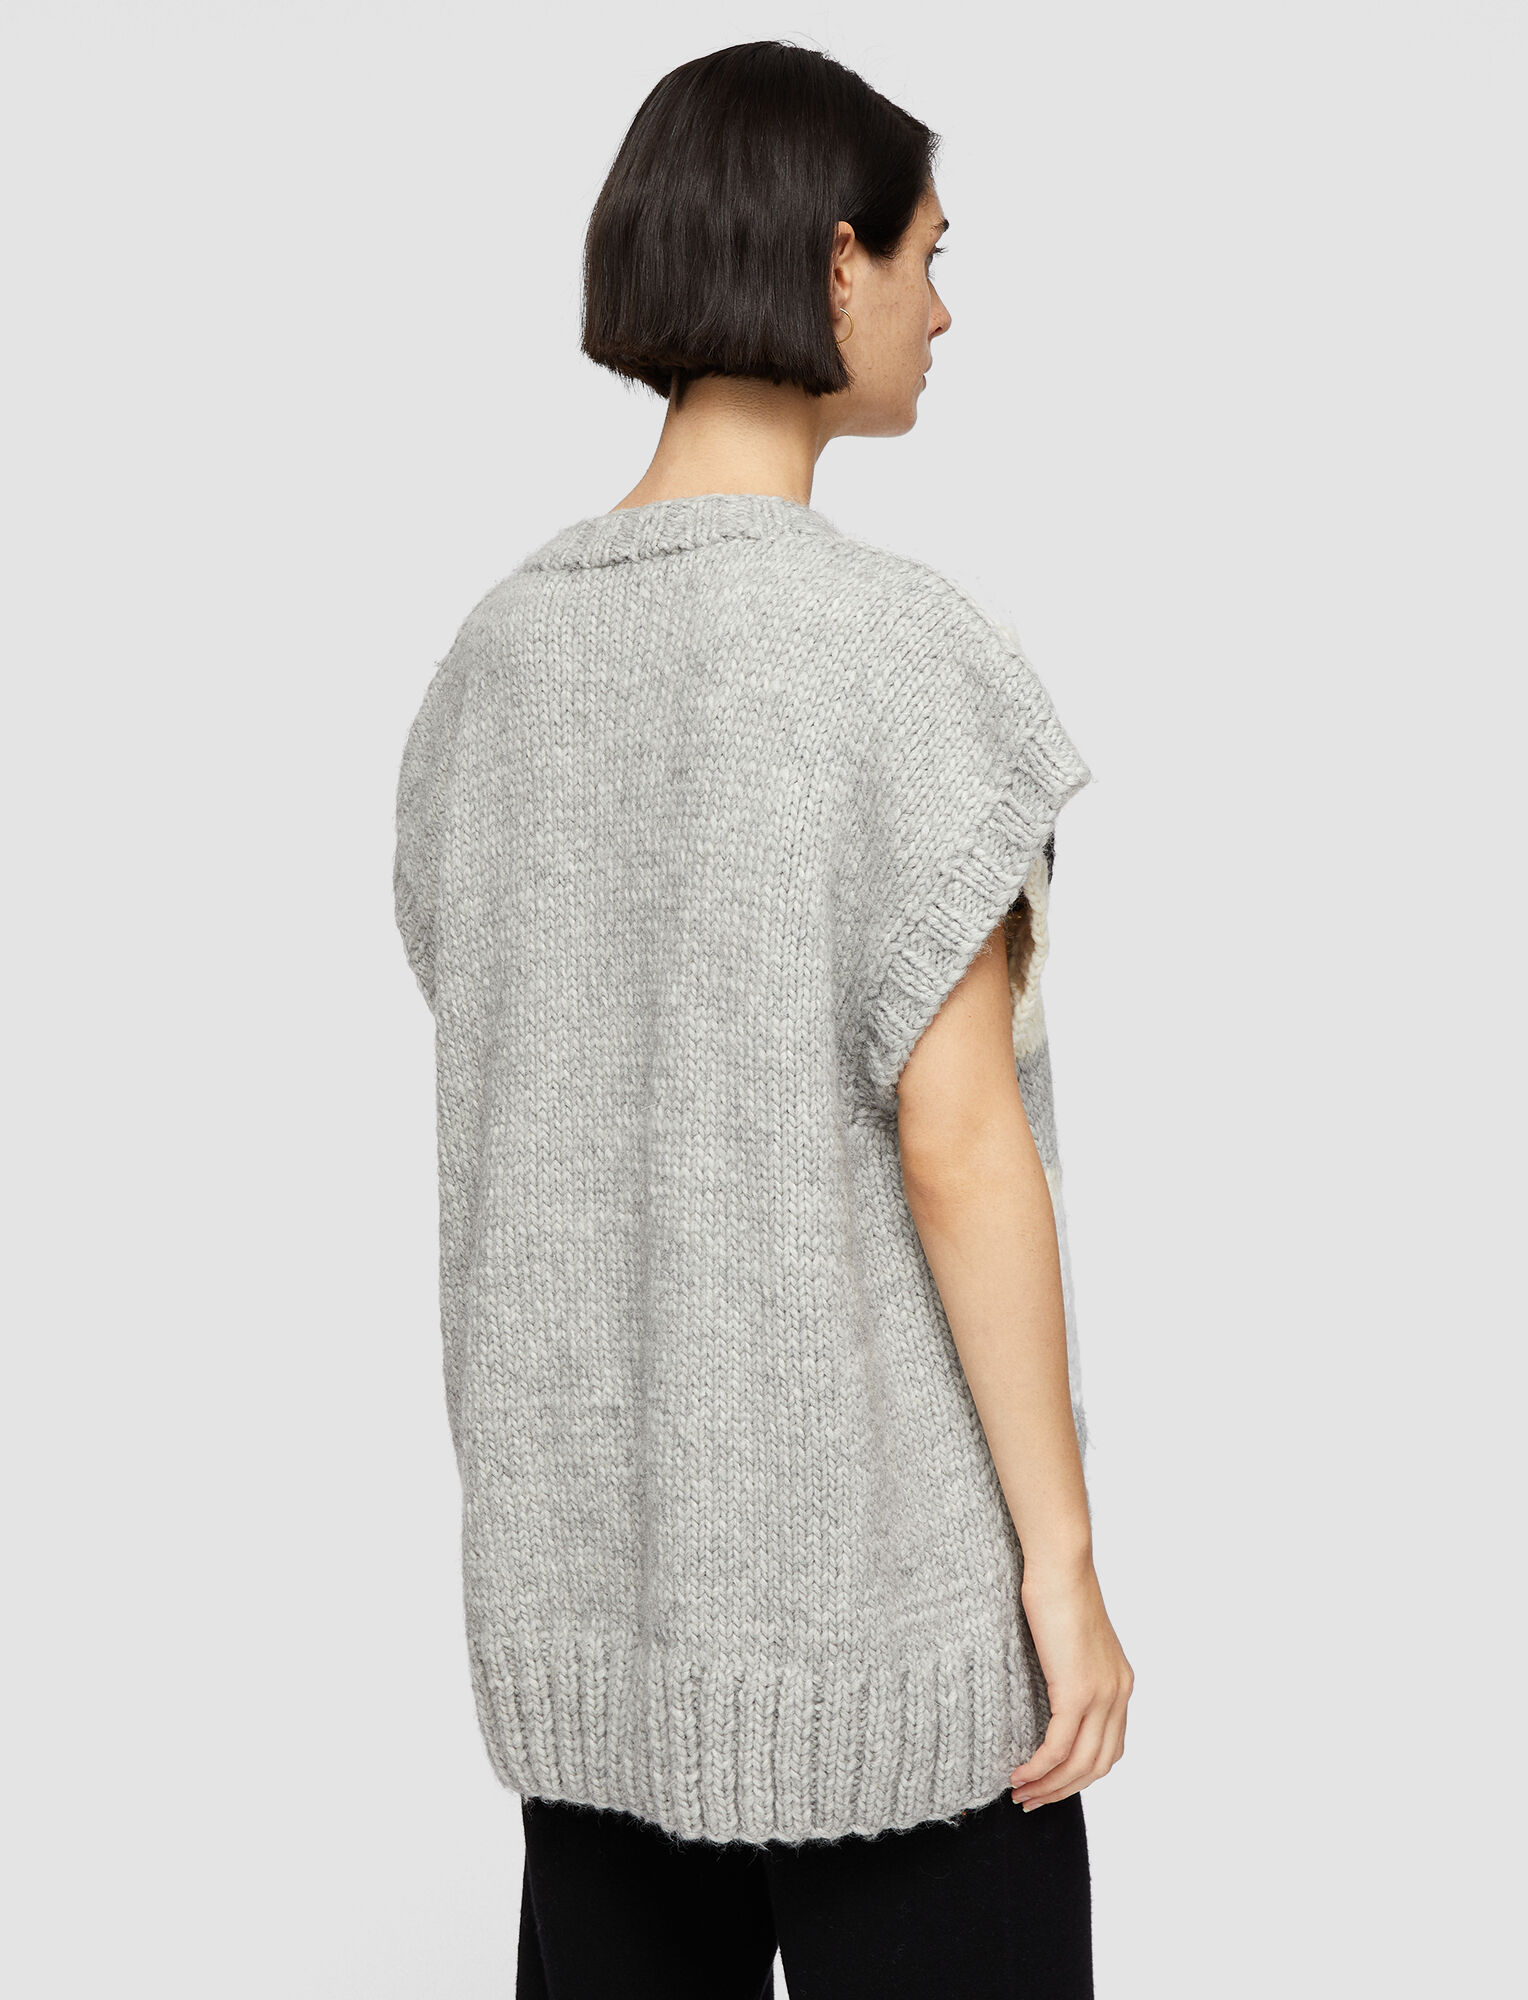 Joseph, The Waste Project V Neck Jumper, in Grey Combo